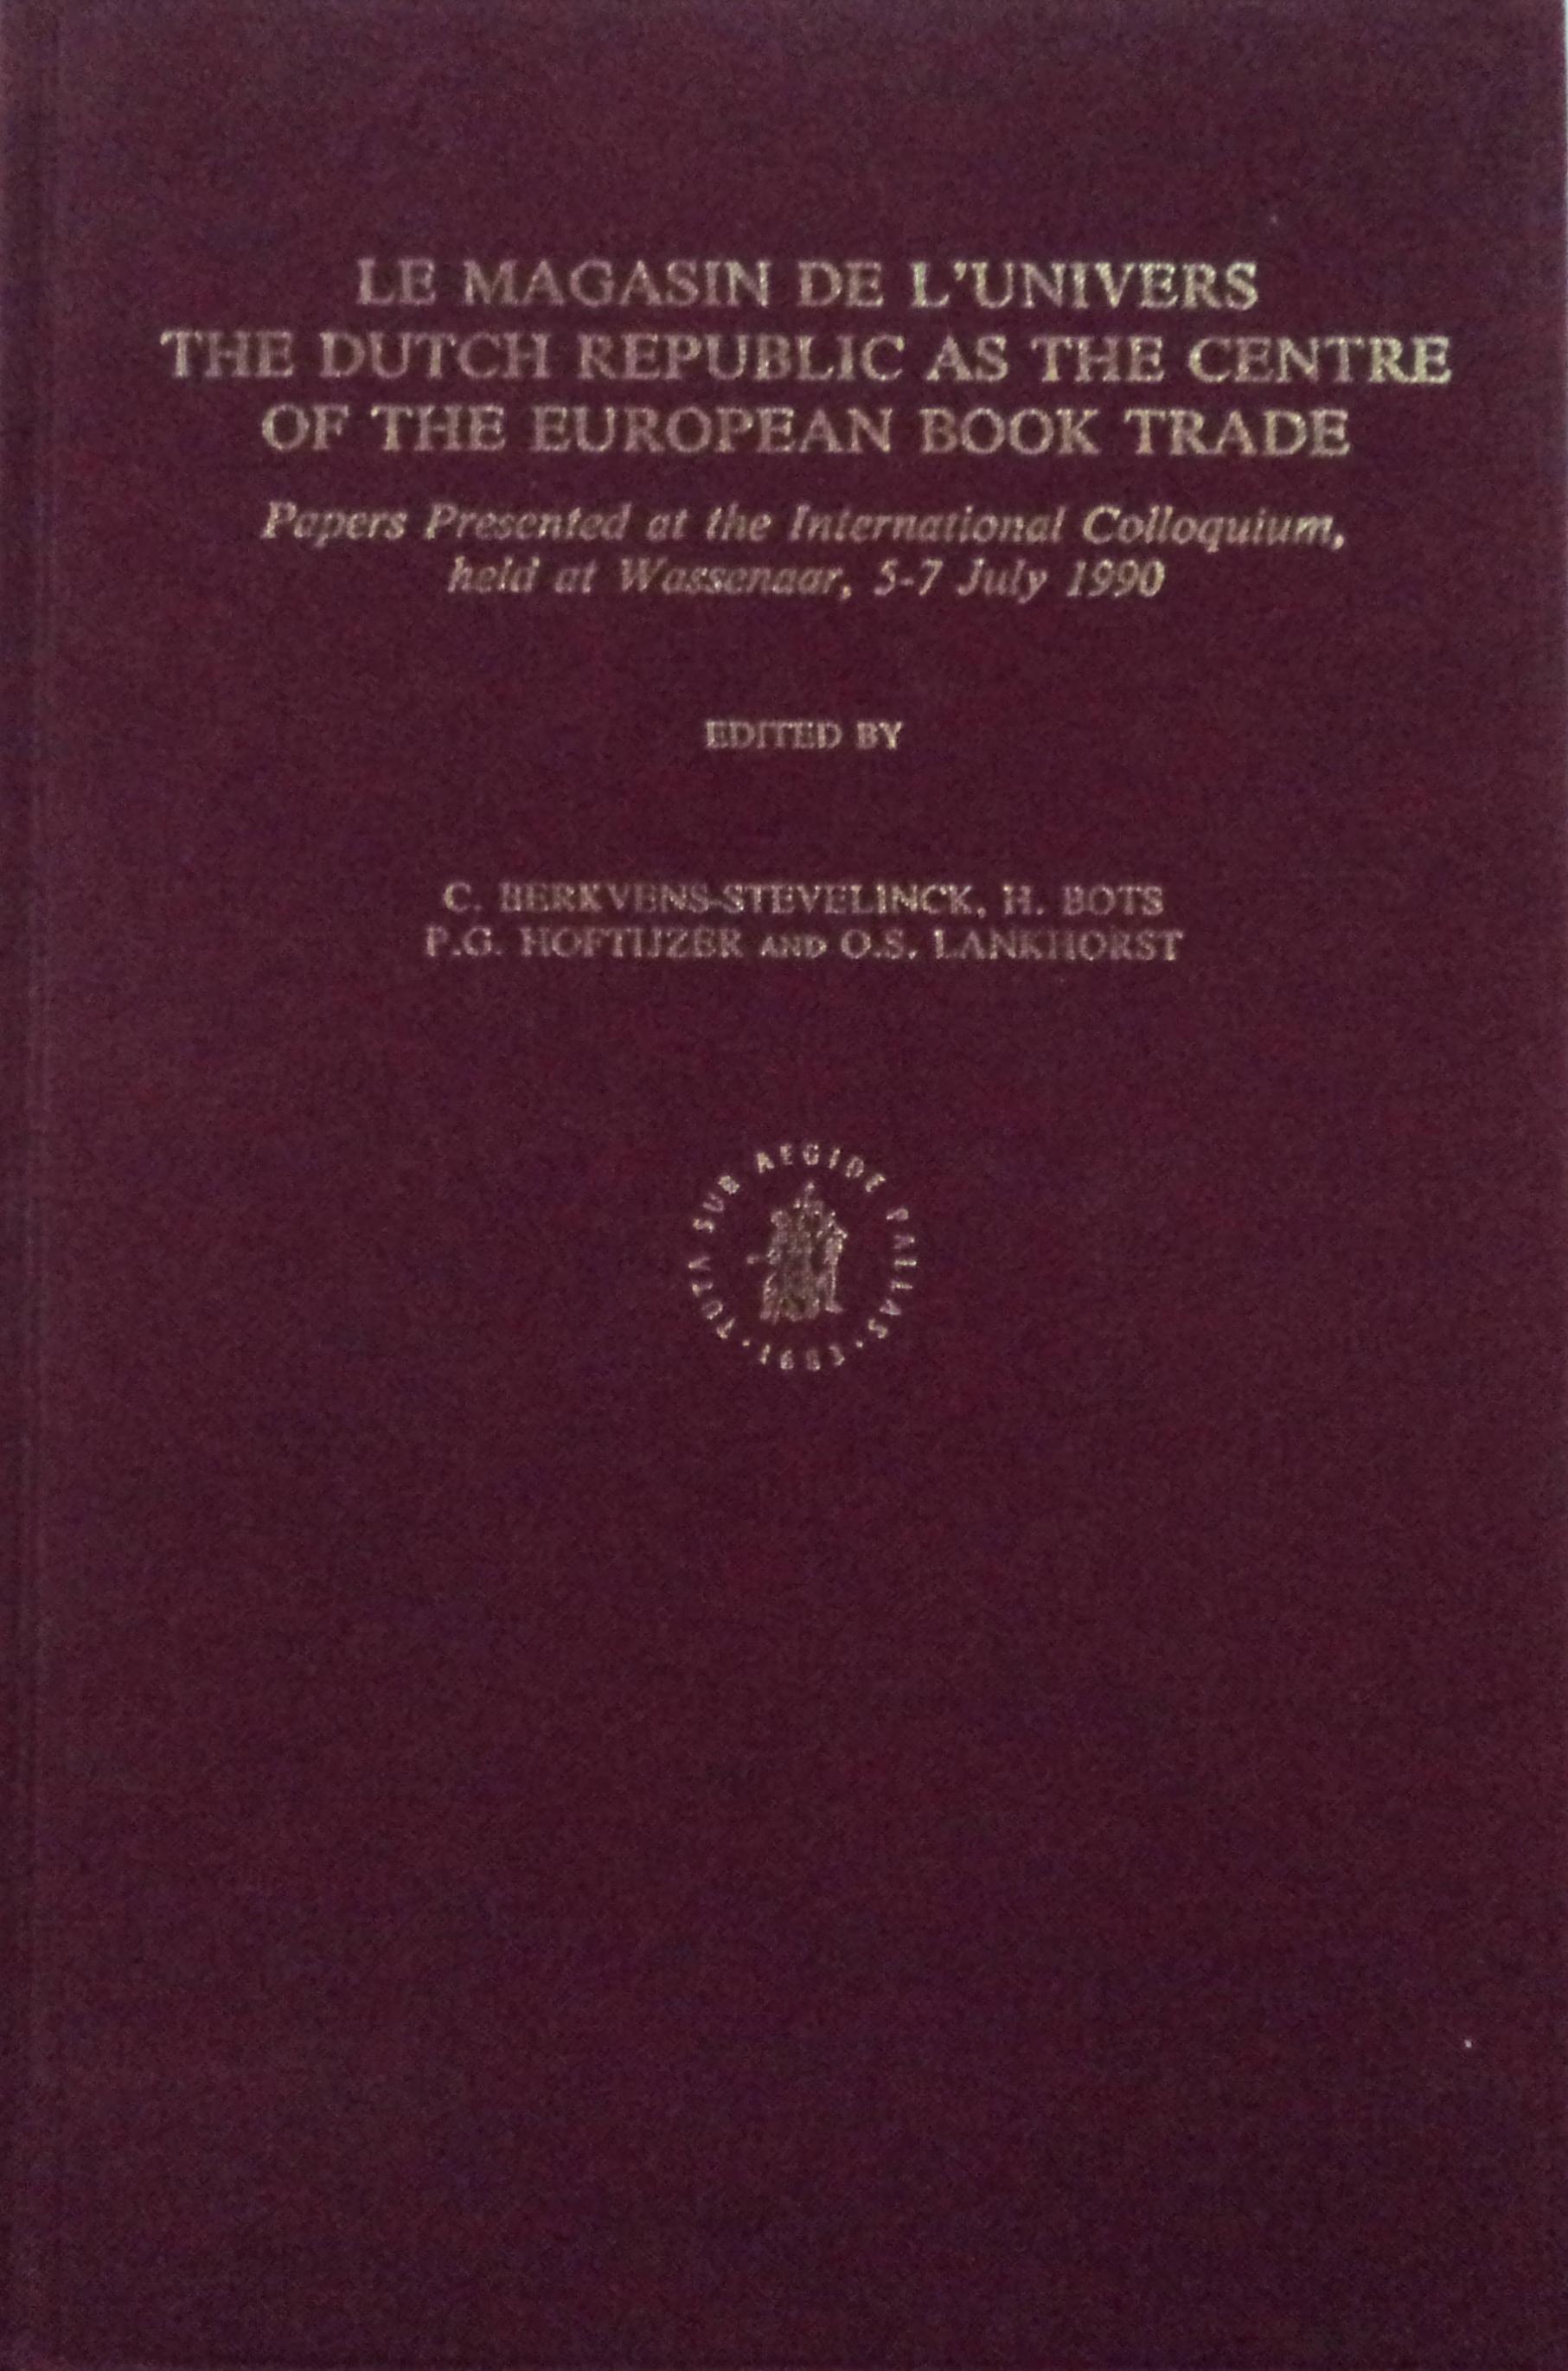 Le magasin de l'univers: The Dutch Republic as the Centre of the European Book Trade: Papers Presented at the International Colloquium, held at Wassenaar, 5-7 July 1990 (Brill's Studies in Intellectual History, 31) - Berkvens-Stevelinck, C. (Editor), and Bots, H. (Editor), and Hoftijzer, Paul G. (Editor), and Lankhorst, O.S.